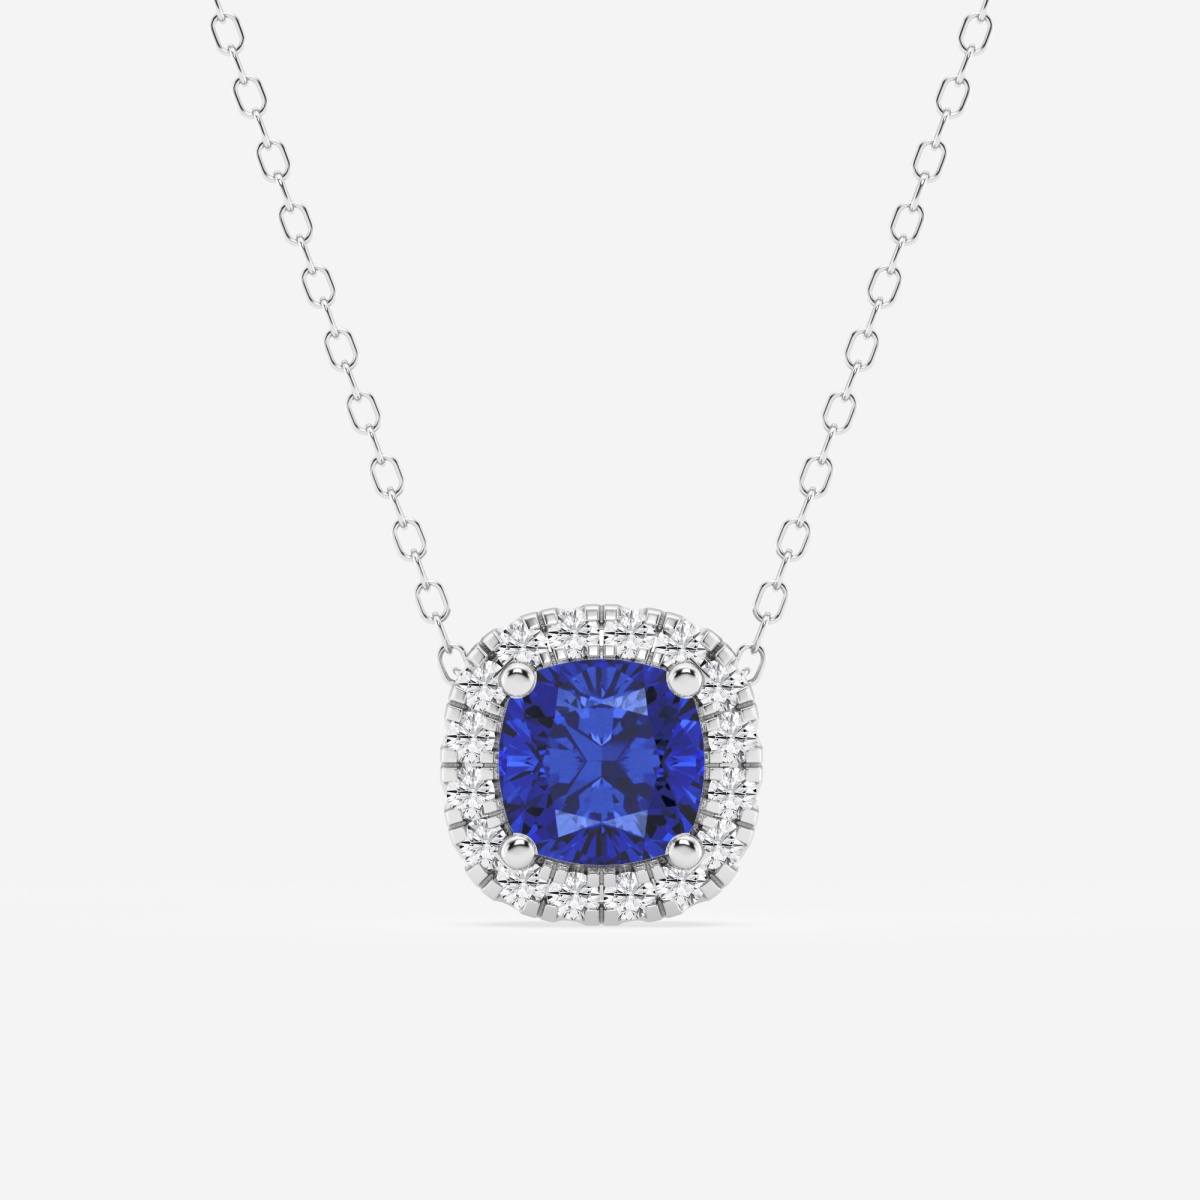 5.7x5.5 mm Cushion Cut Created Sapphire and 1/5 ctw Round Lab Grown Diamond Halo Pendant with Adjustable Chain